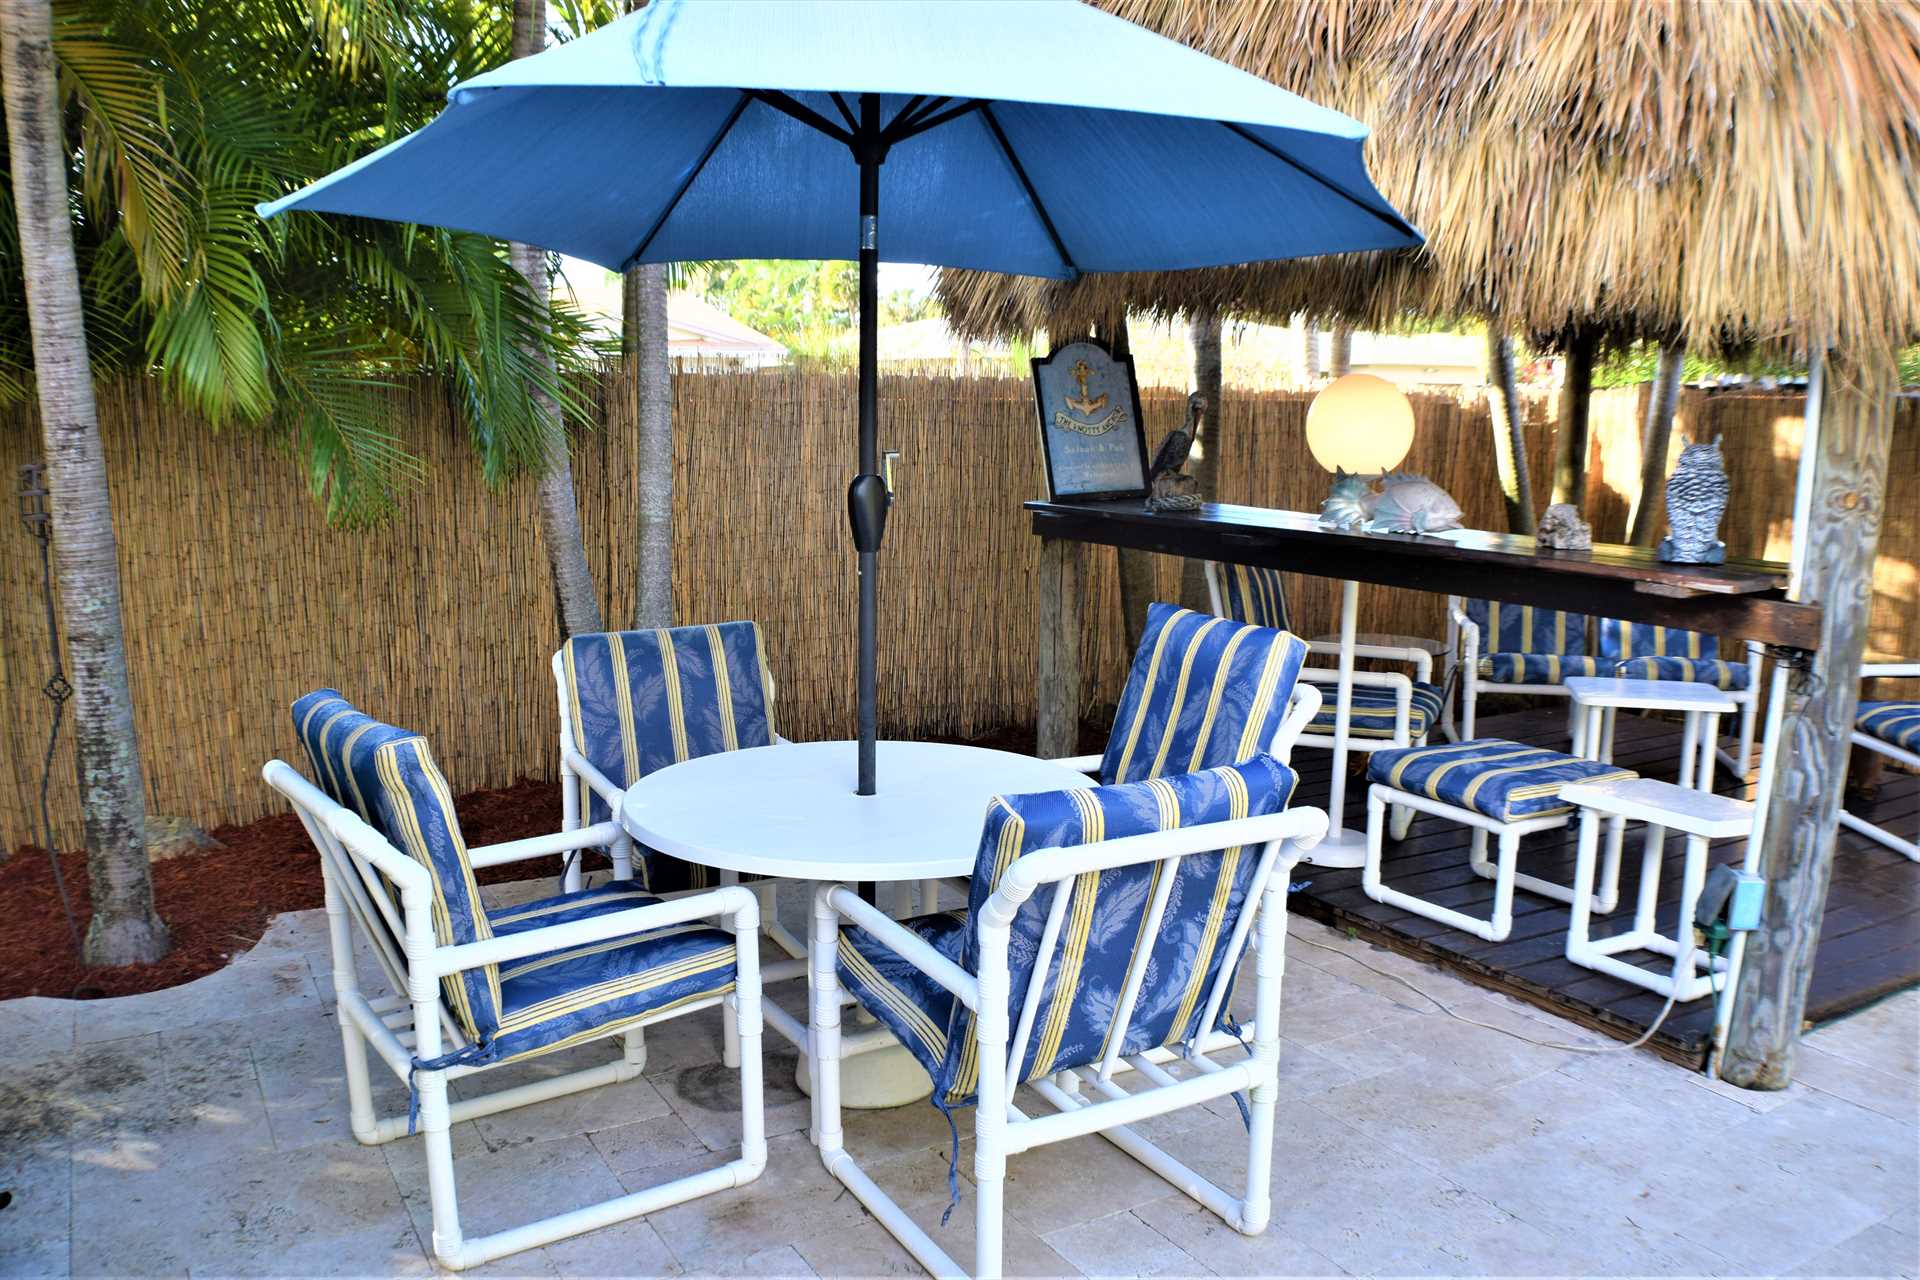 Dine poolside and enjoy the South Florida Lifestyle.